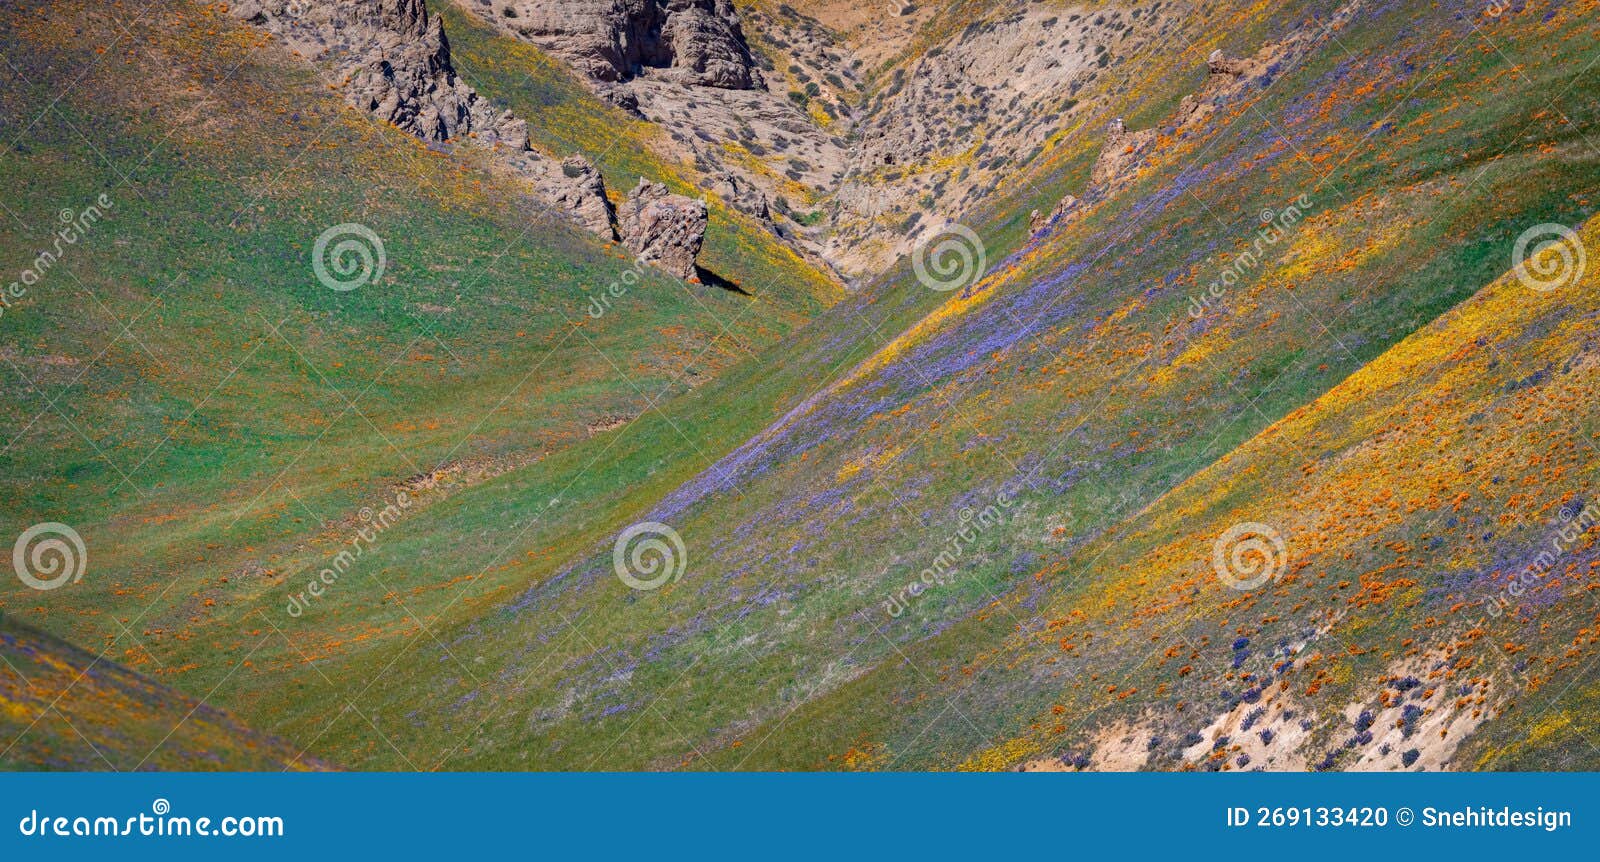 slope of gorman hills with colorful spring bloom in california